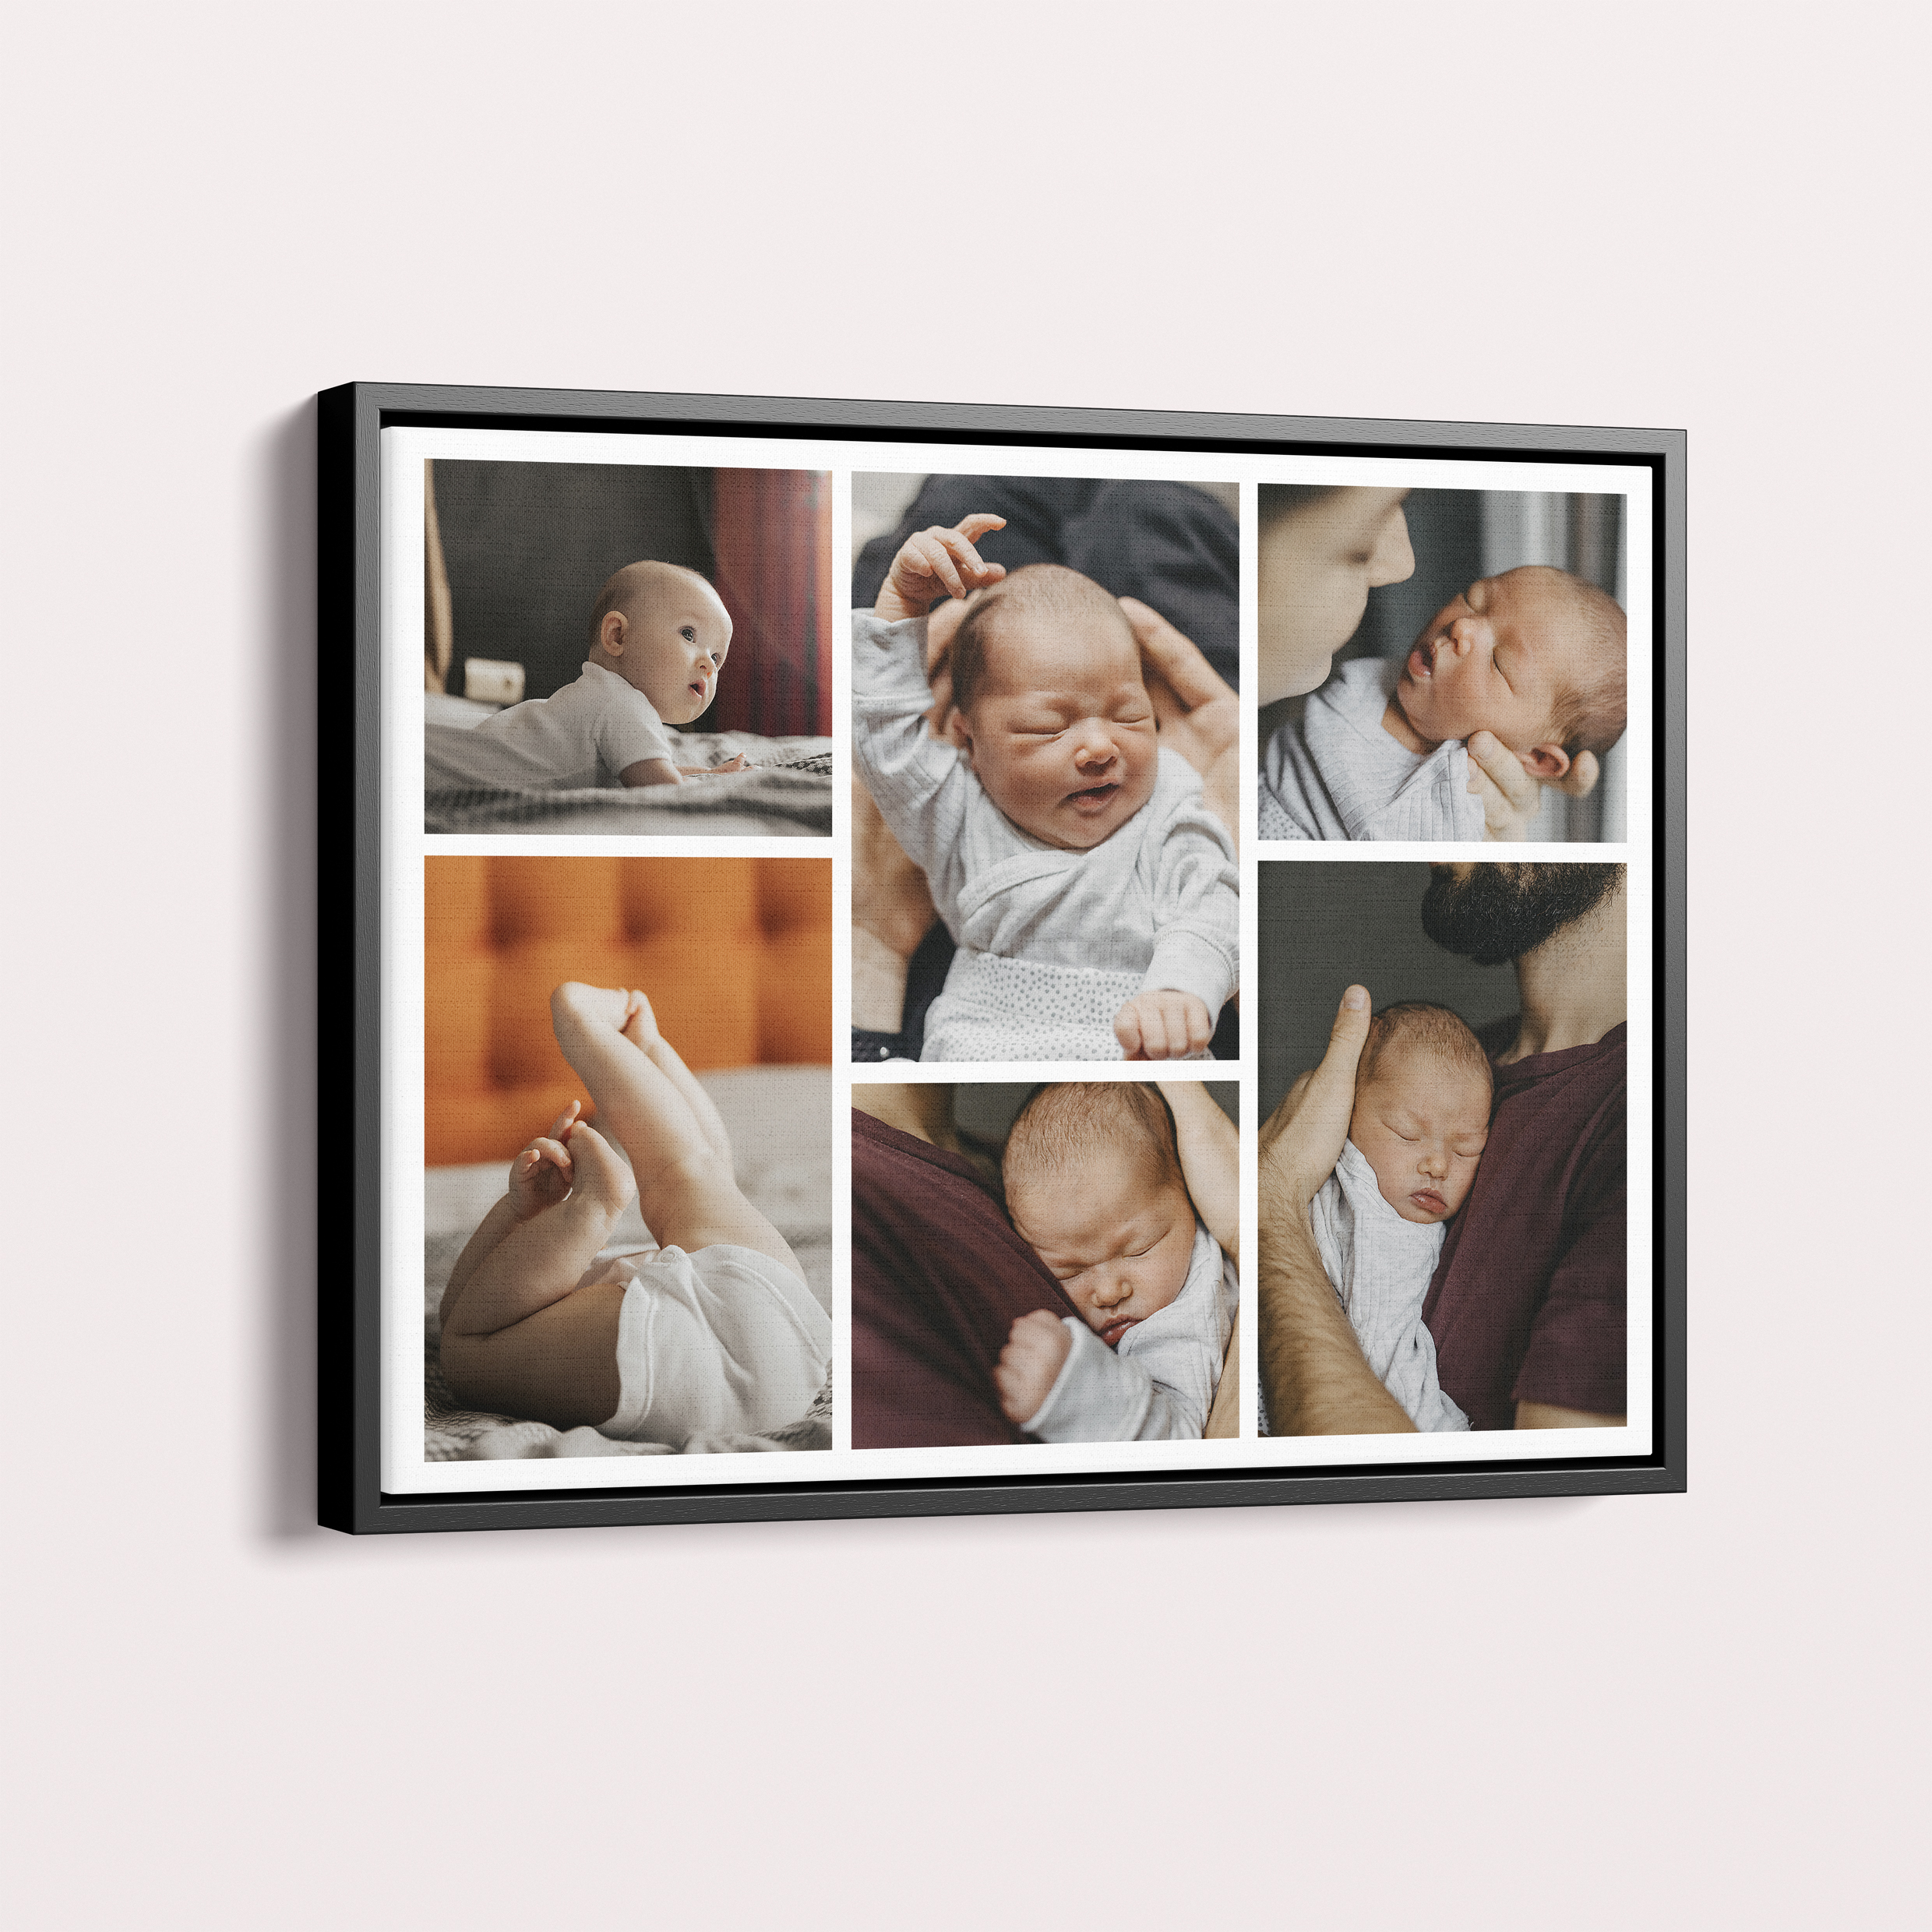  Personalized Memories Mosaic Framed Photo Canvas - Preserve memories in exquisite detail with a captivating mosaic design.